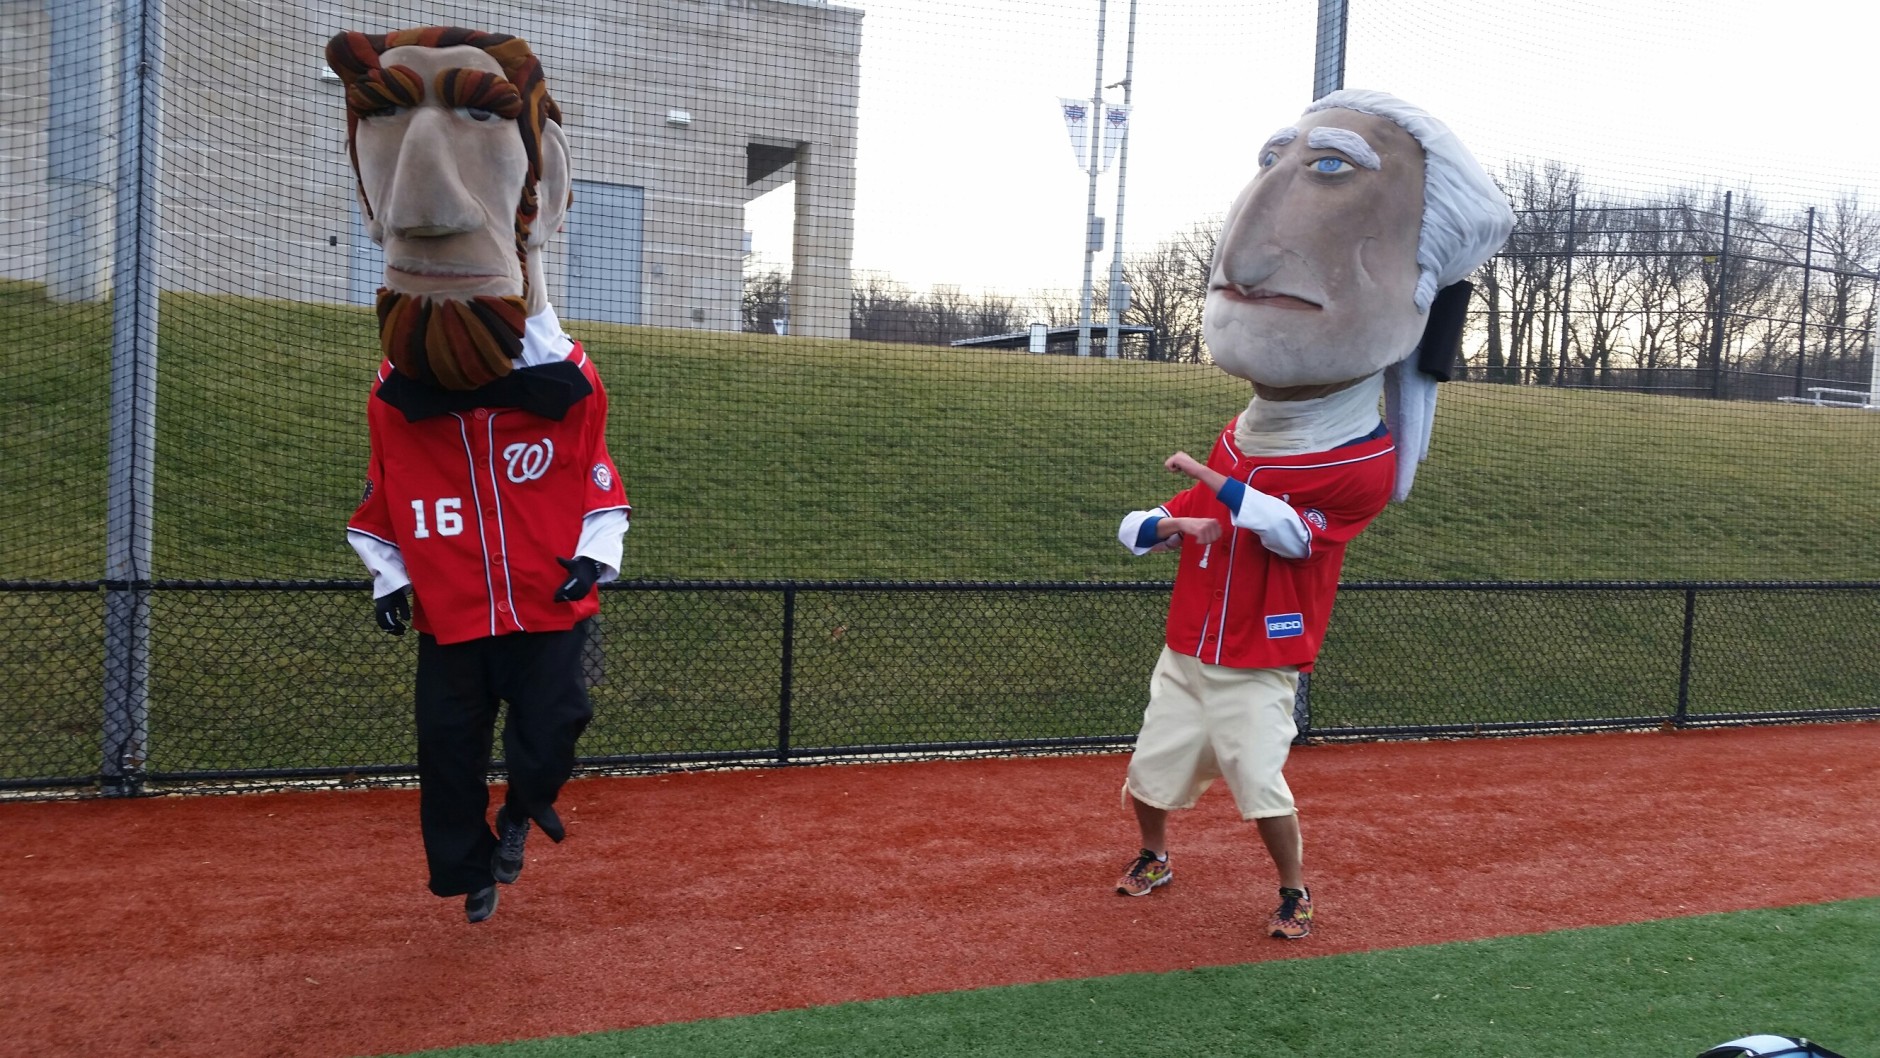 On Saturday, local residents auditioned for the Washington Nationals' President's Race. (WTOP/Kathy Stewart)